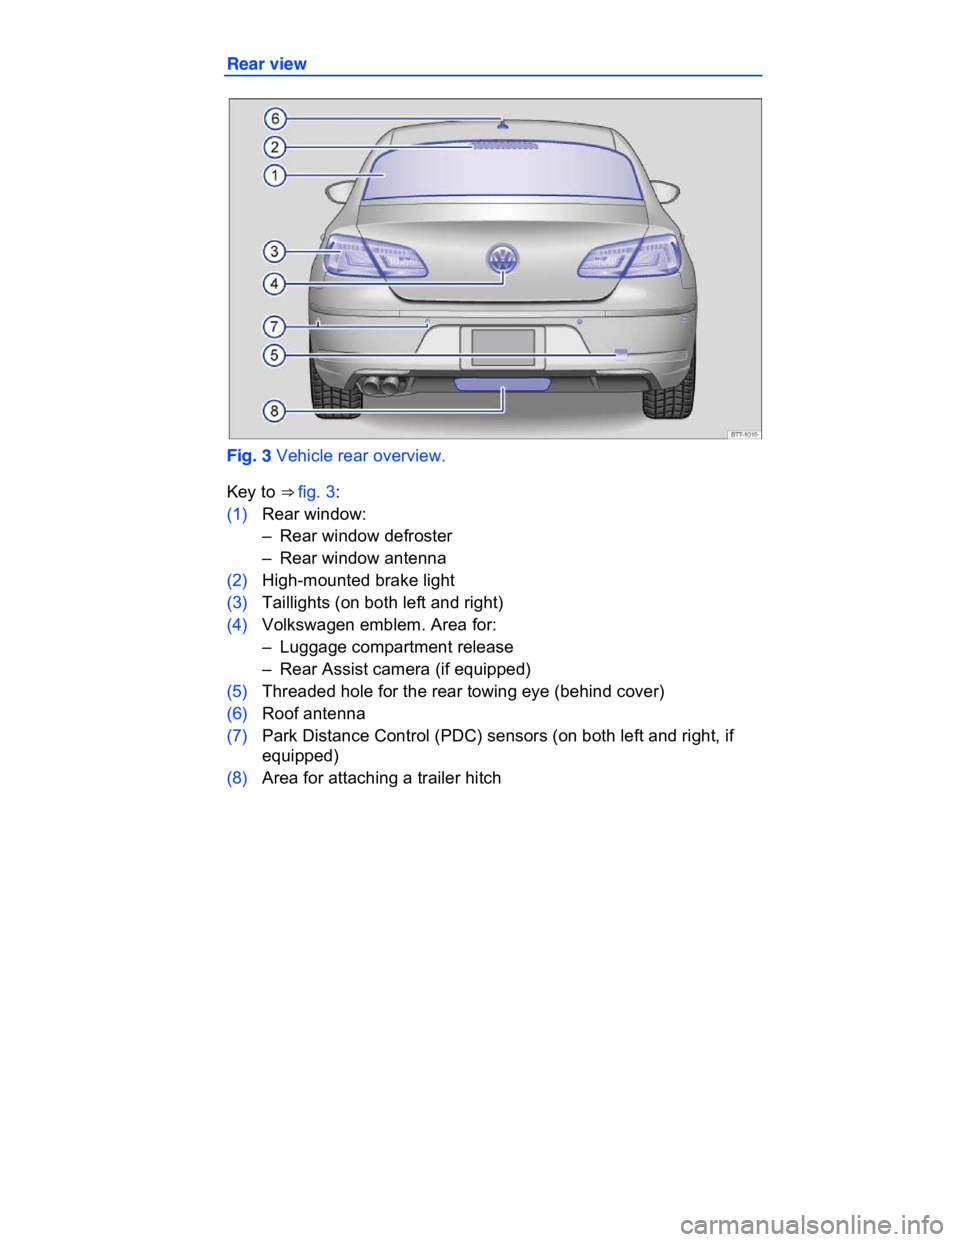 VOLKSWAGEN CC 2009  Owners Manual  
Rear view 
 
Fig. 3 Vehicle rear overview. 
Key to ⇒ fig. 3: 
(1) Rear window: 
–  Rear window defroster  
–  Rear window antenna  
(2) High-mounted brake light 
(3) Taillights (on both left